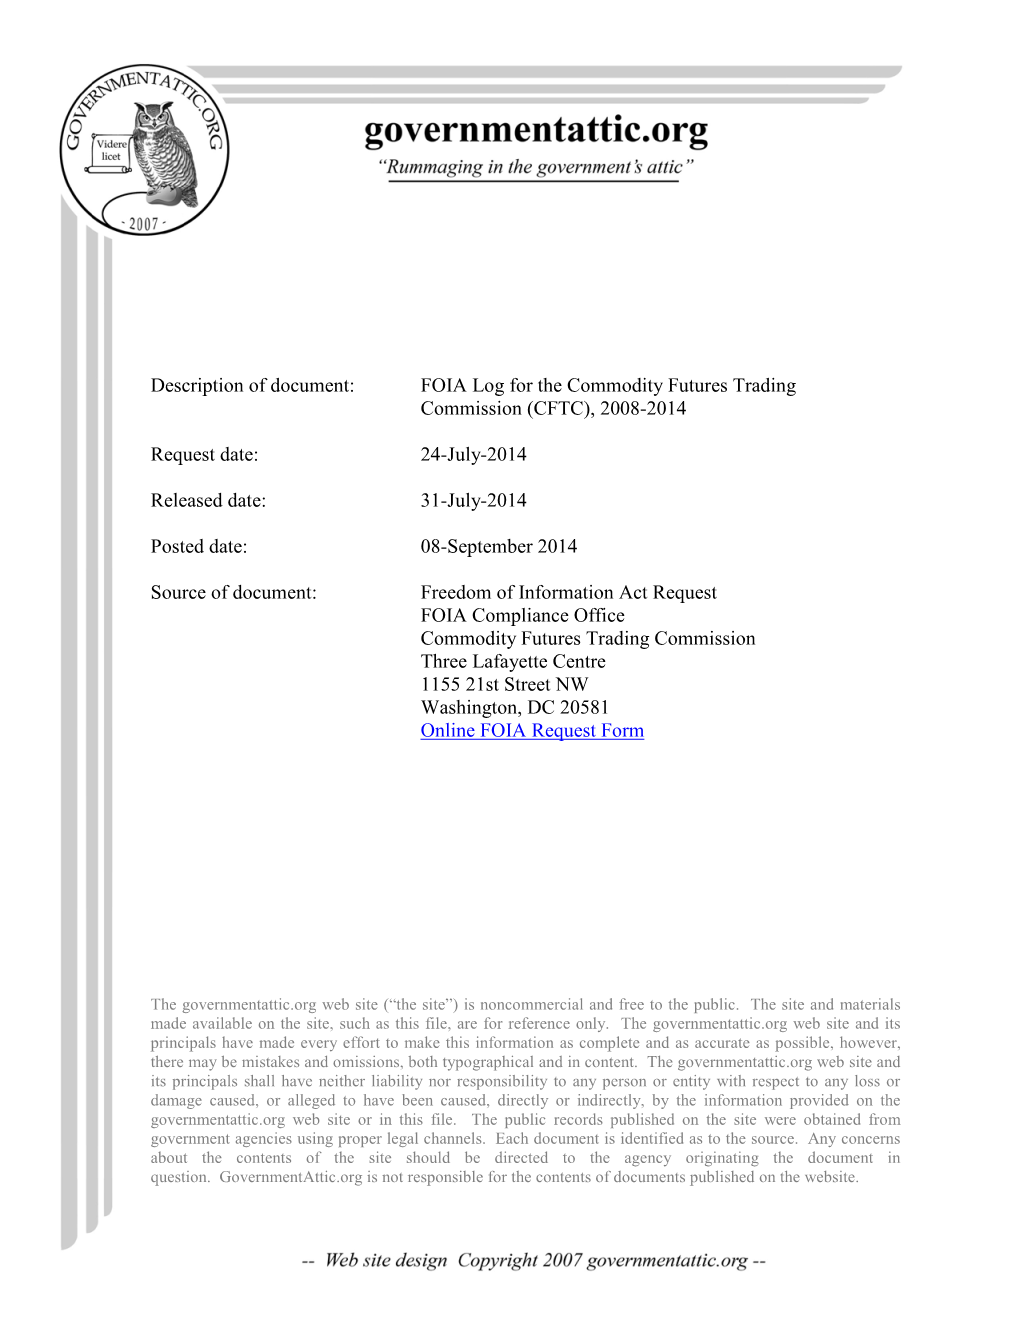 FOIA Log for the Commodity Futures Trading Commission (CFTC), 2008-2014